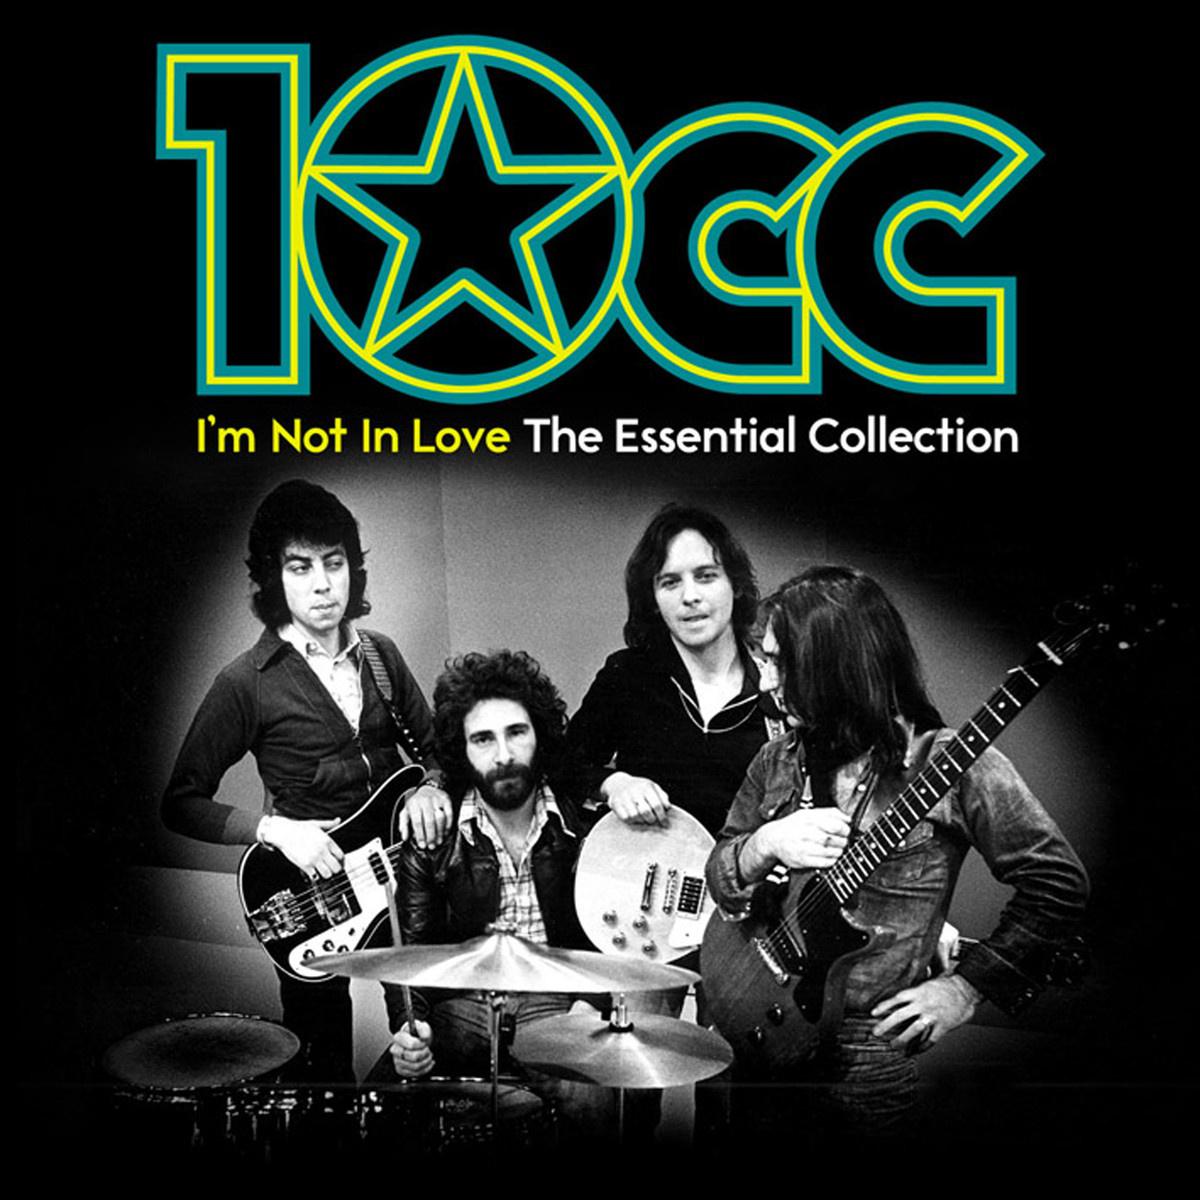 上 一 篇. #10cc. 热 度(2). 2016.07.09. 银 河 护 卫 队. I'm not in love just beca...